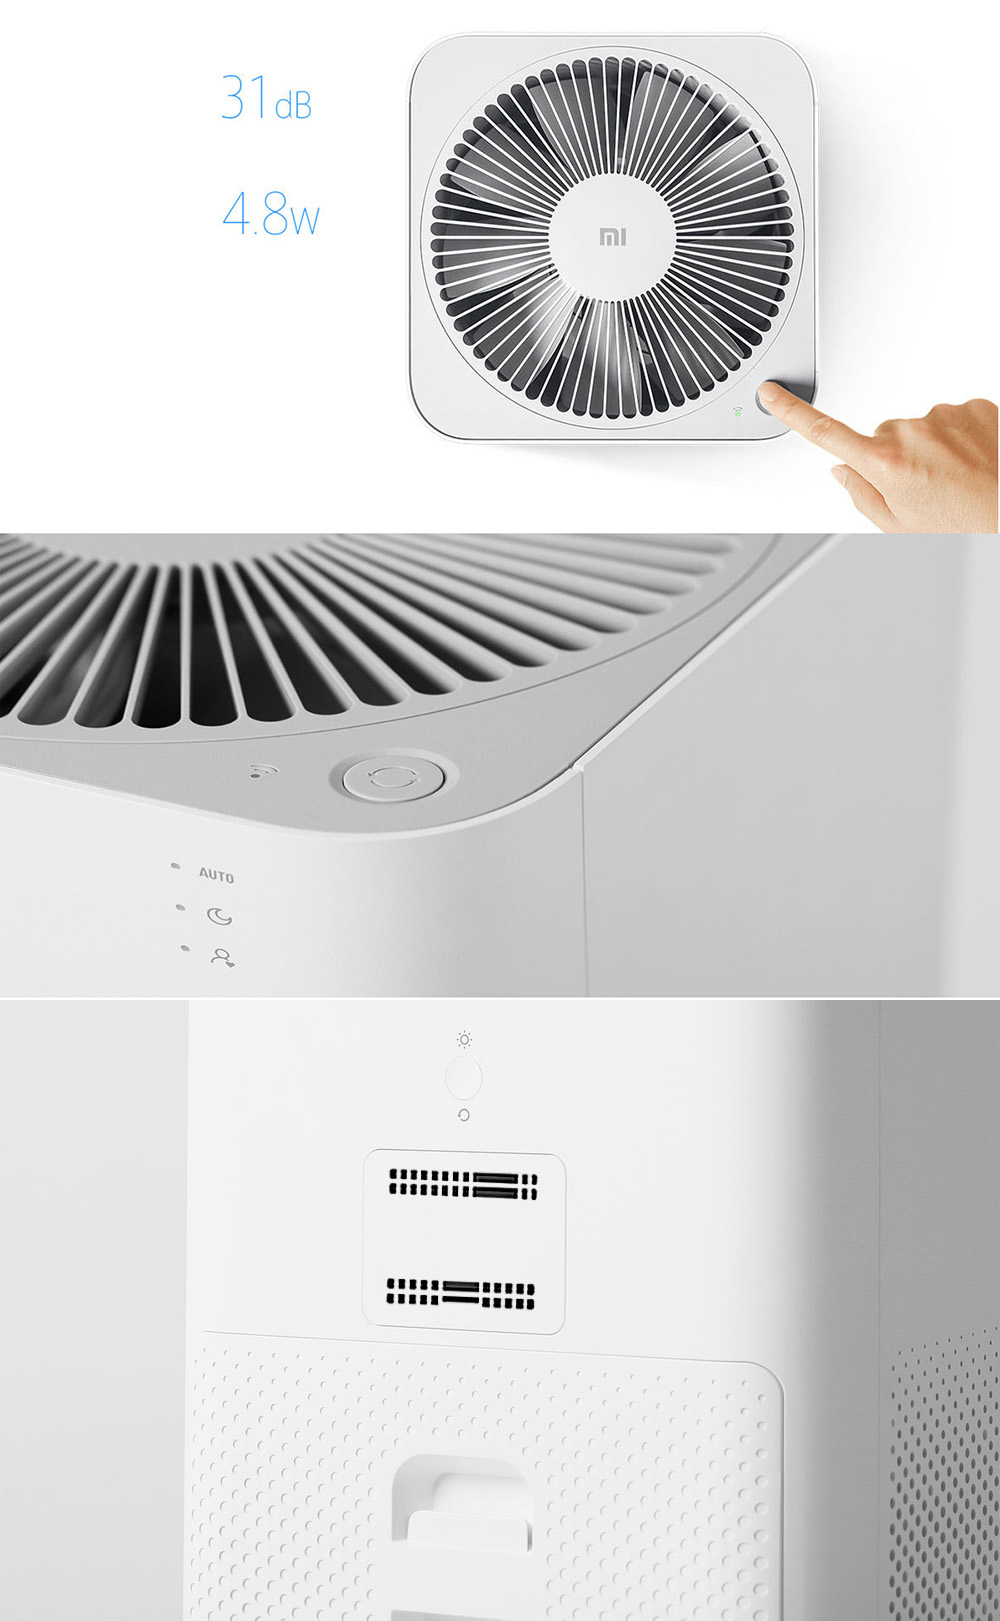 Xiaomi Mi Air Purifier 2 Sterilizer Addition to Formaldehyde Purifiers Air Cleaning Intelligent Household Hepa Filter with APP Remote Control